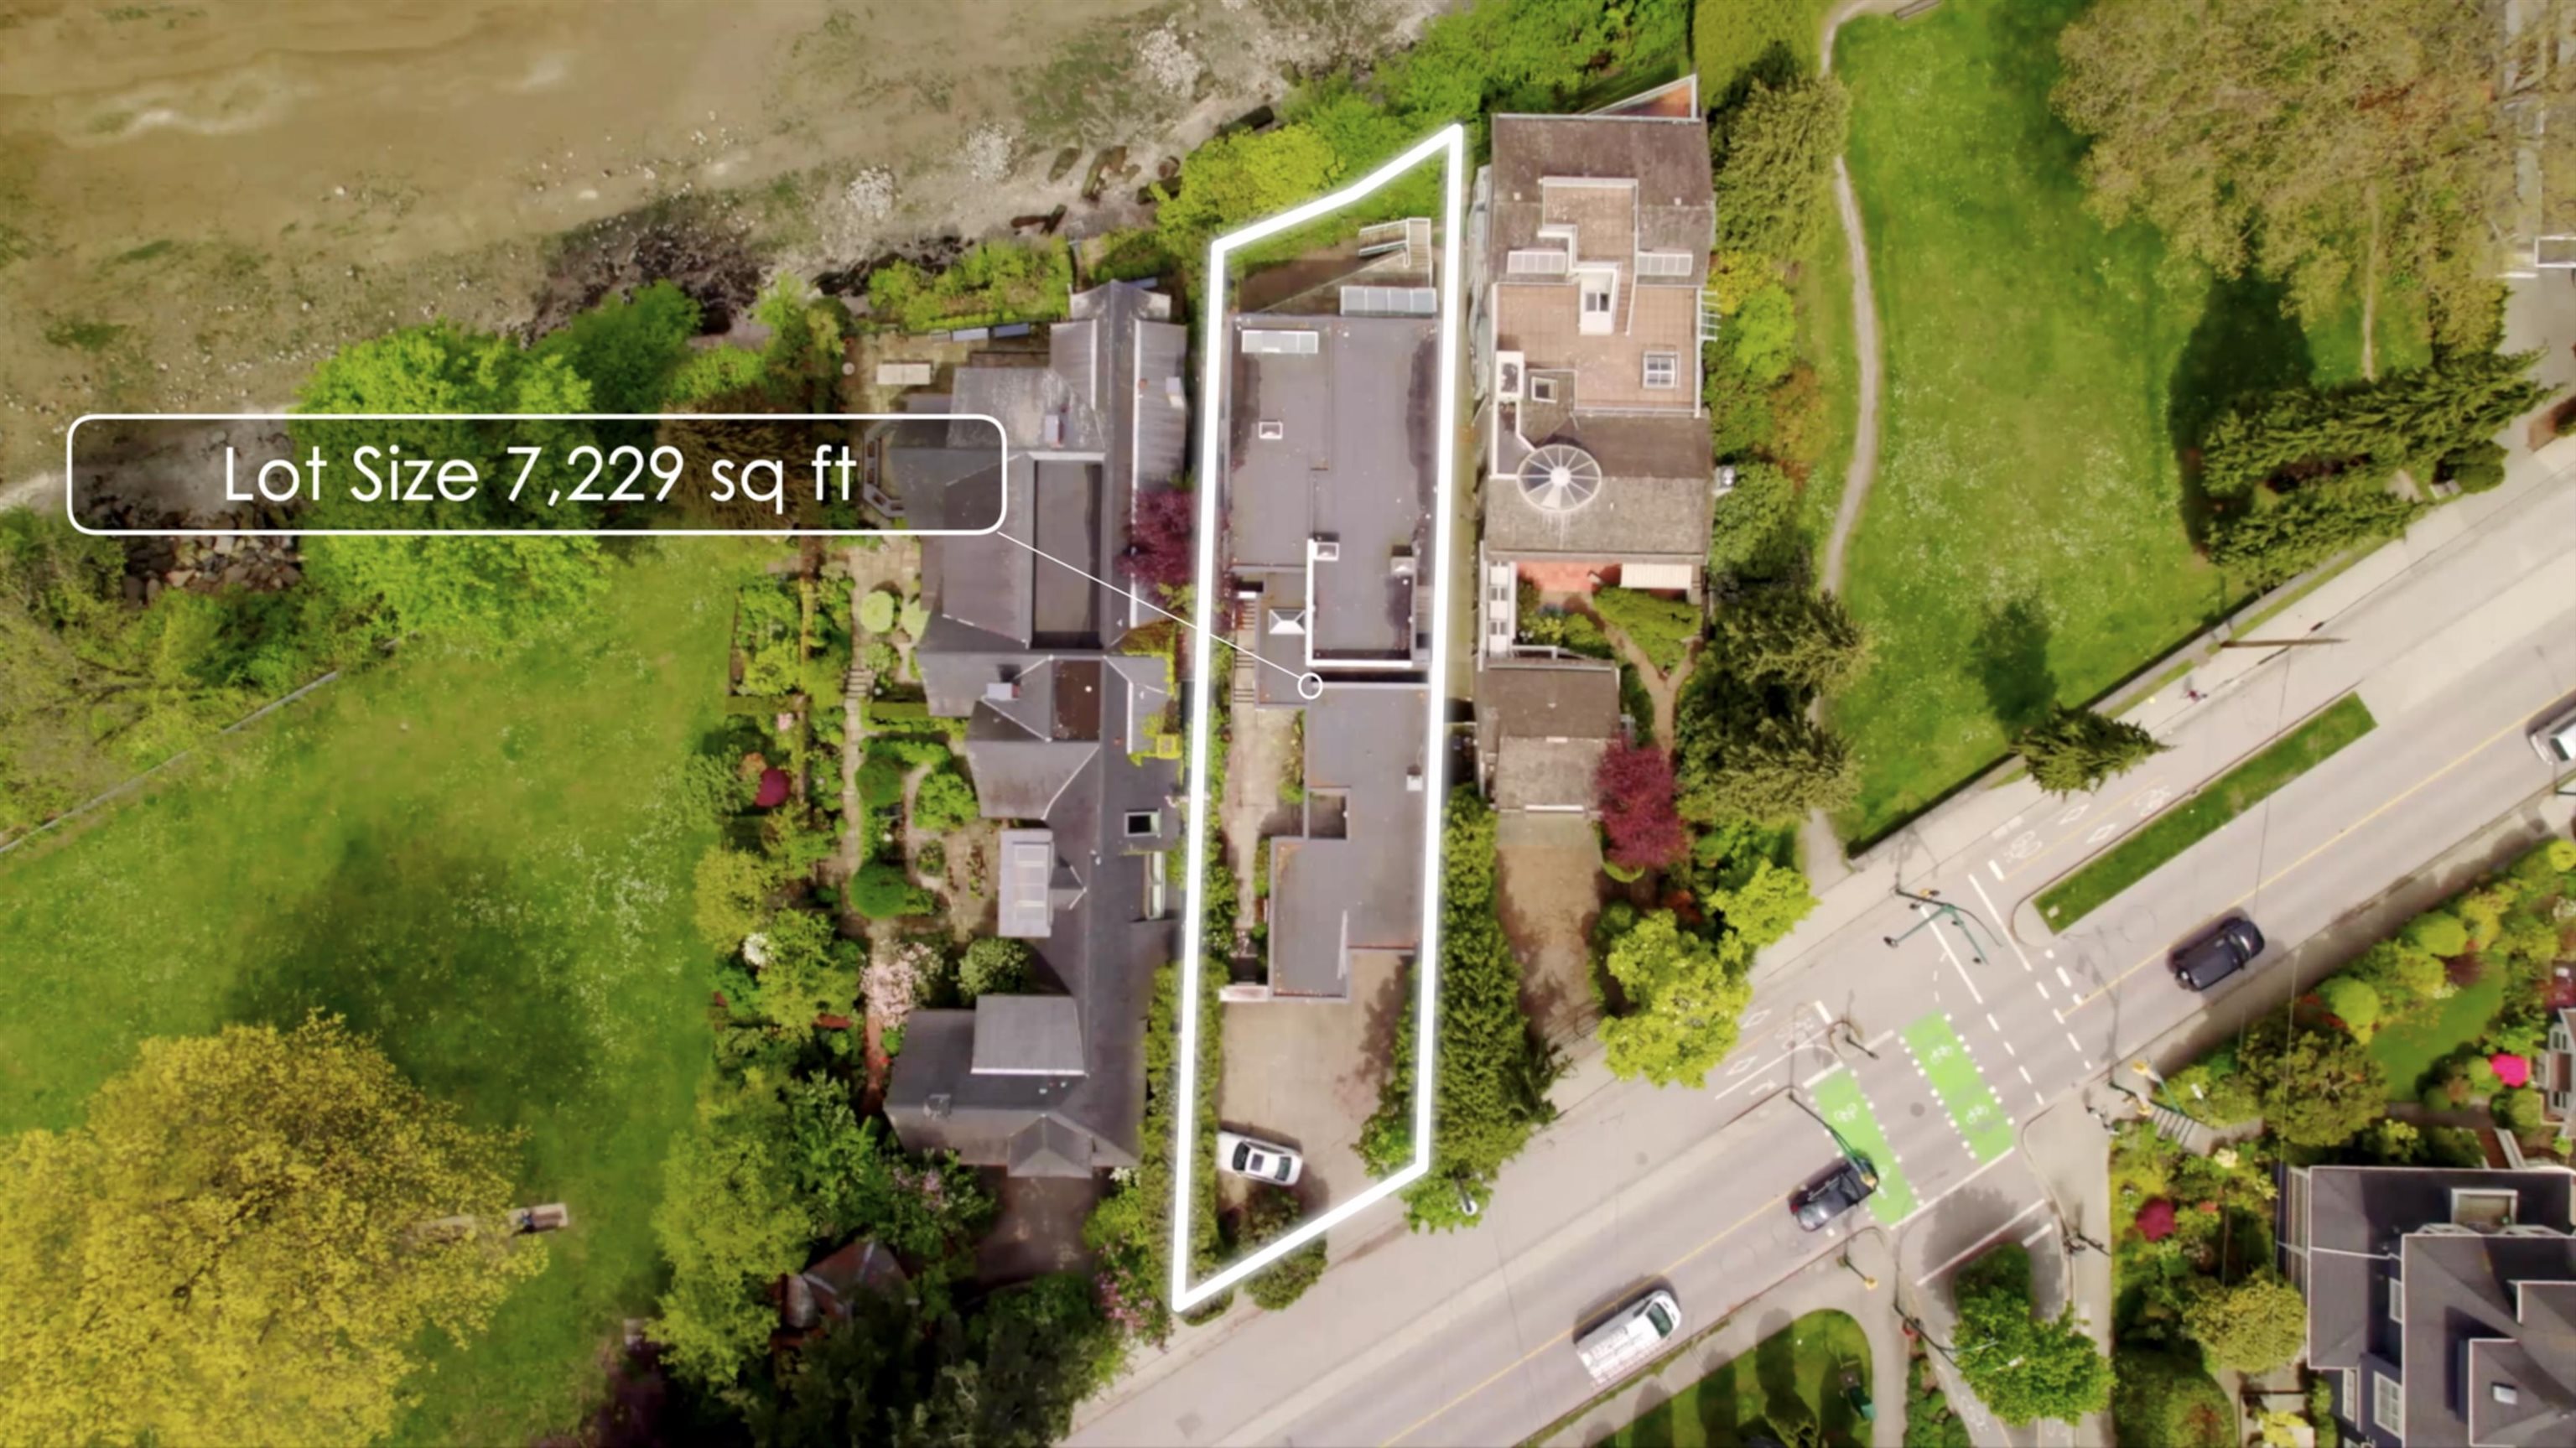 Listing image of 2711 POINT GREY ROAD